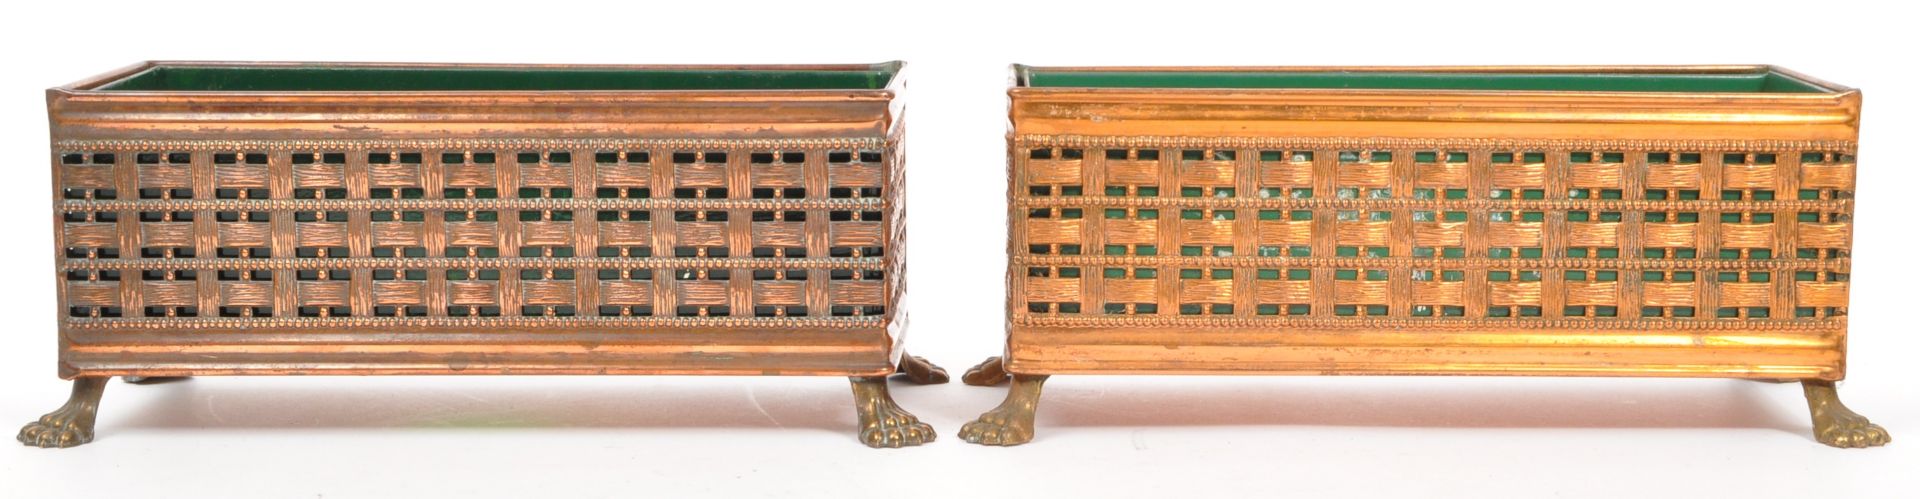 PAIR OF ART & CRAFTS EMBOSSED WICKER EFFECT COPPER PLANTERS - Image 3 of 5